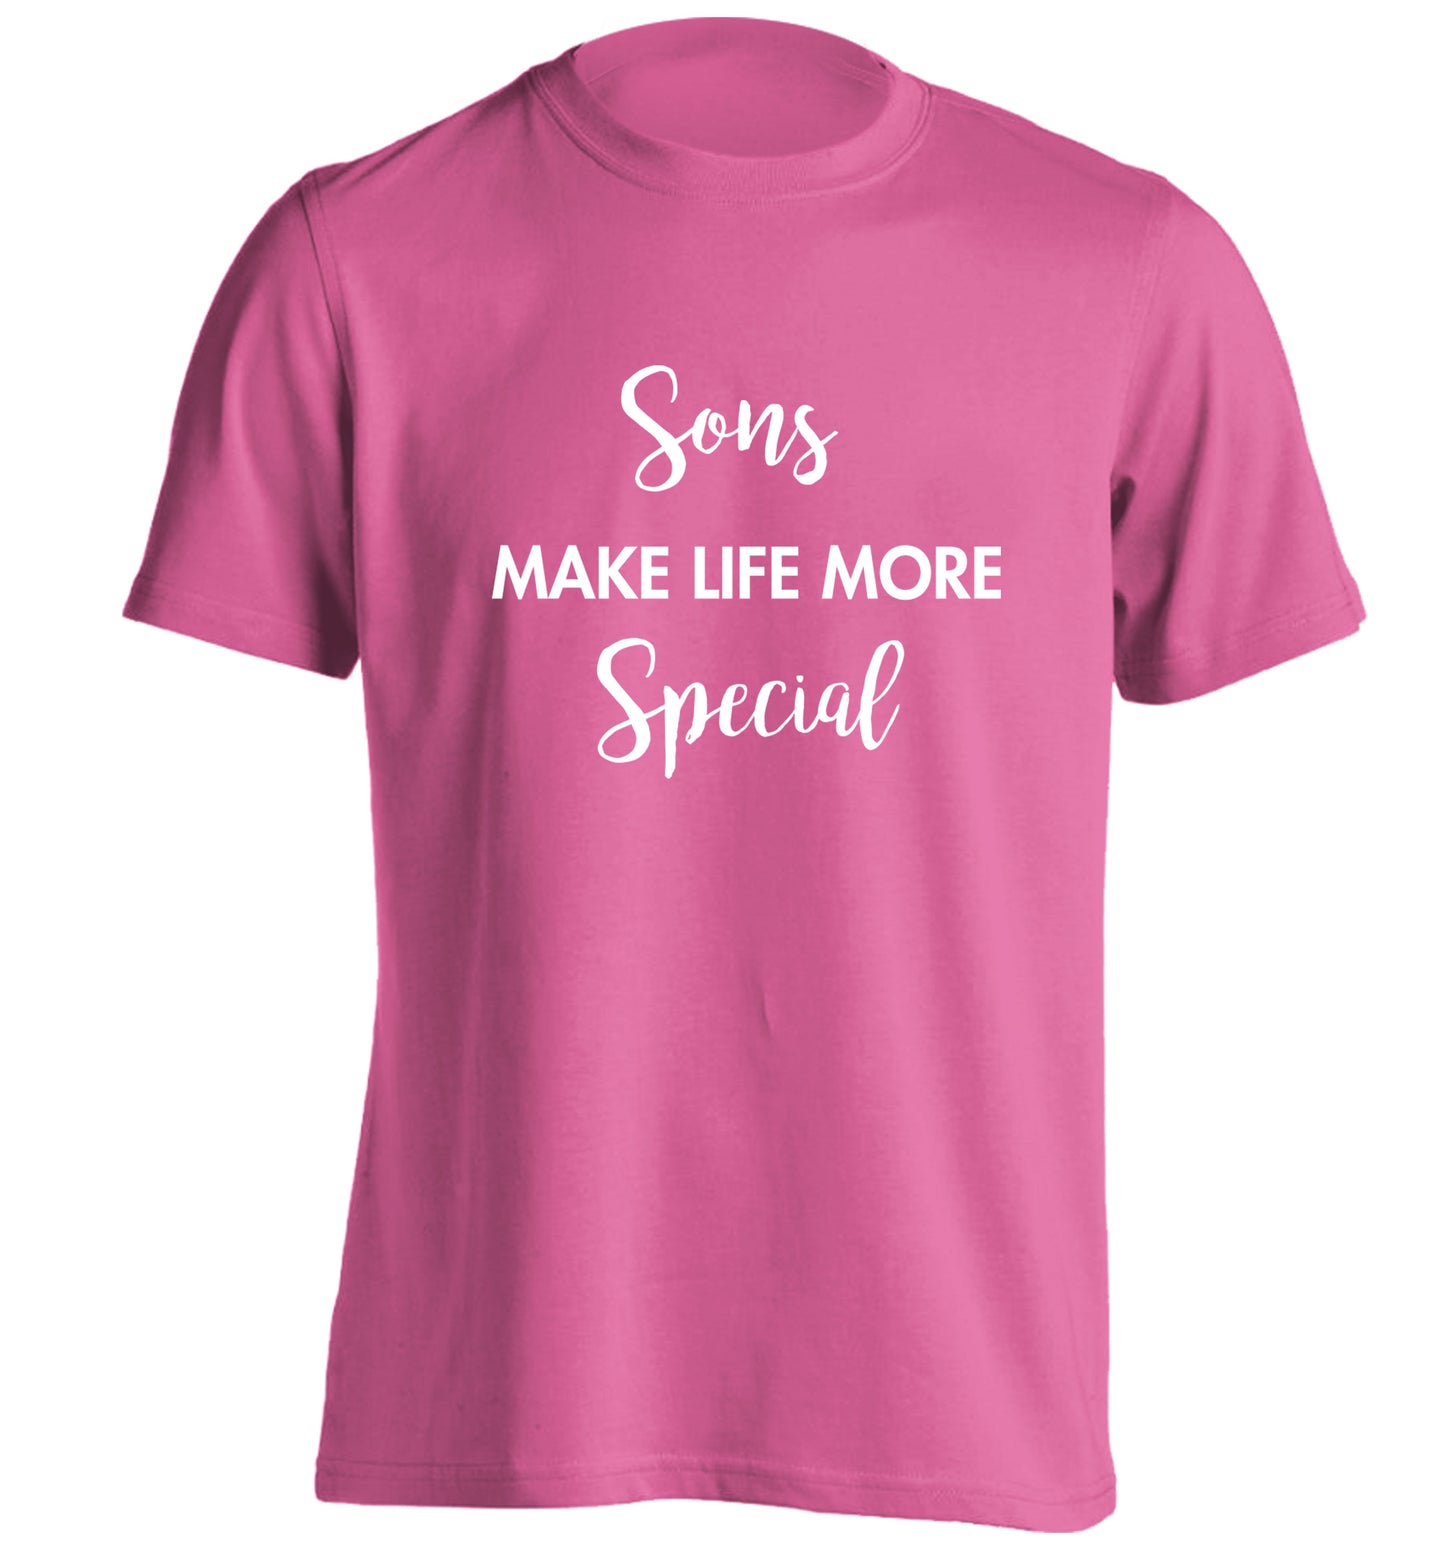 Daughters make life more special adults unisex pink Tshirt 2XL